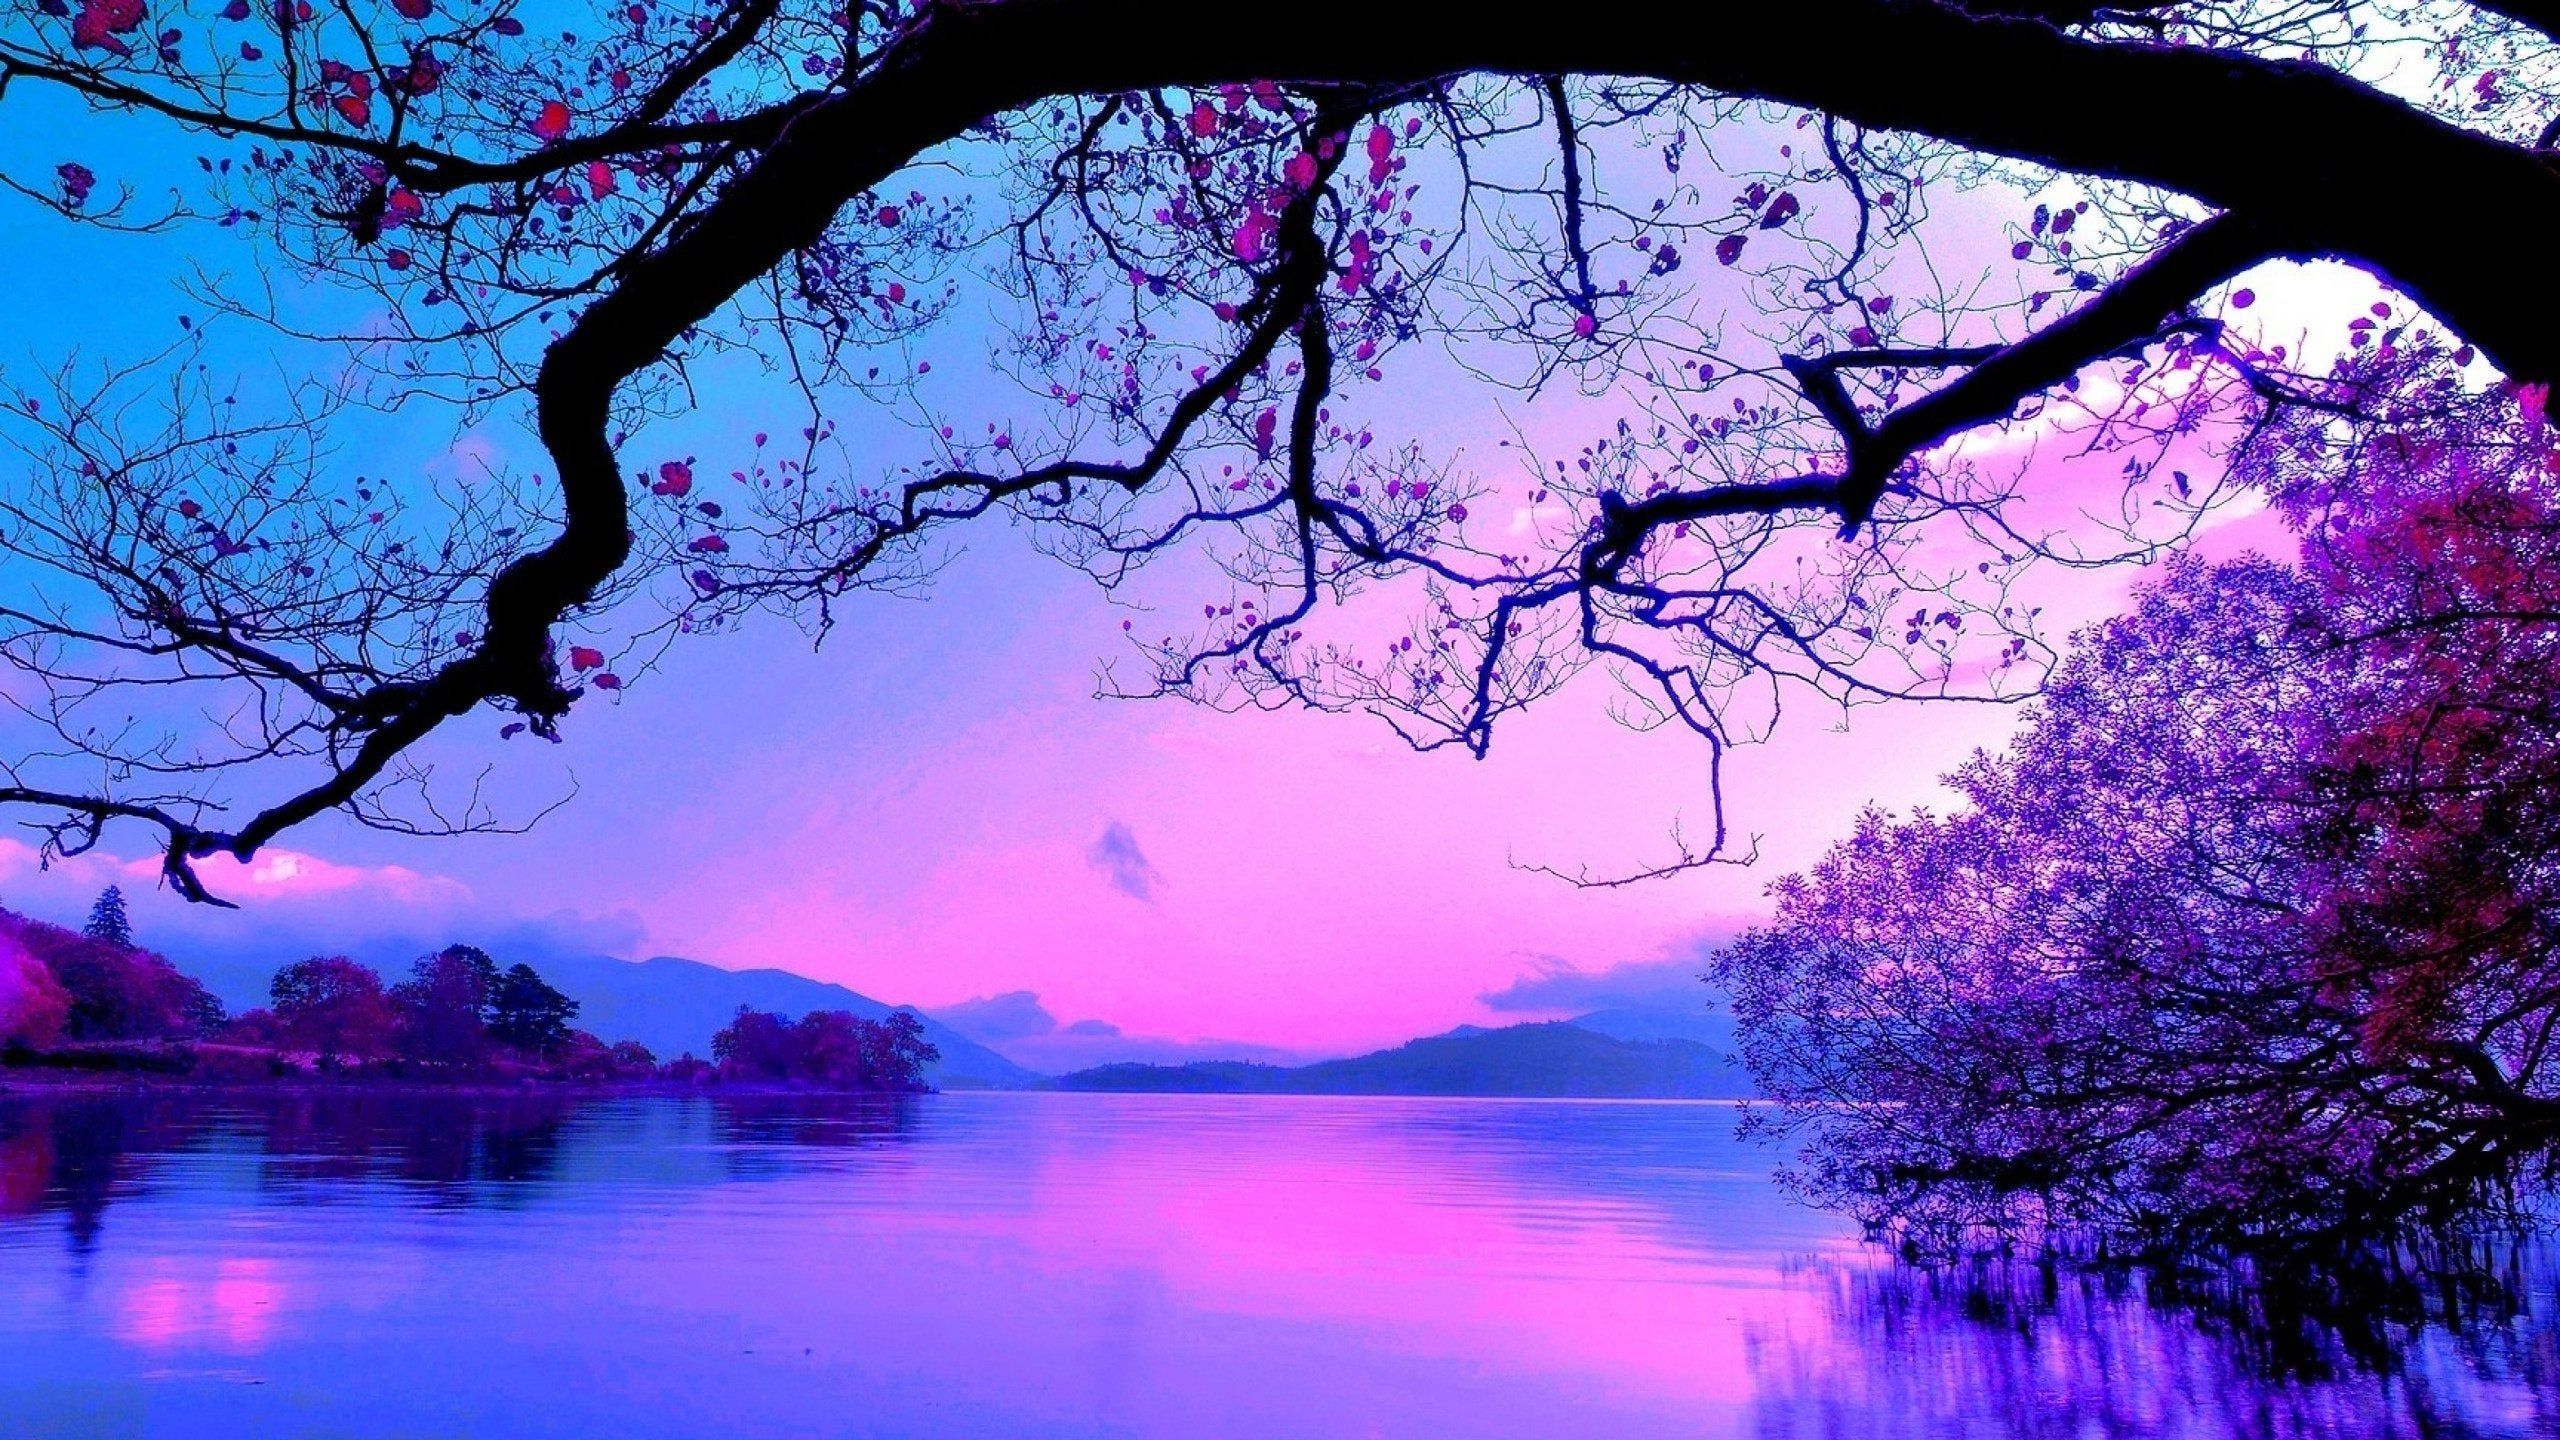 Blue and Purple Sunset Wallpaper Free Blue and Purple Sunset Background